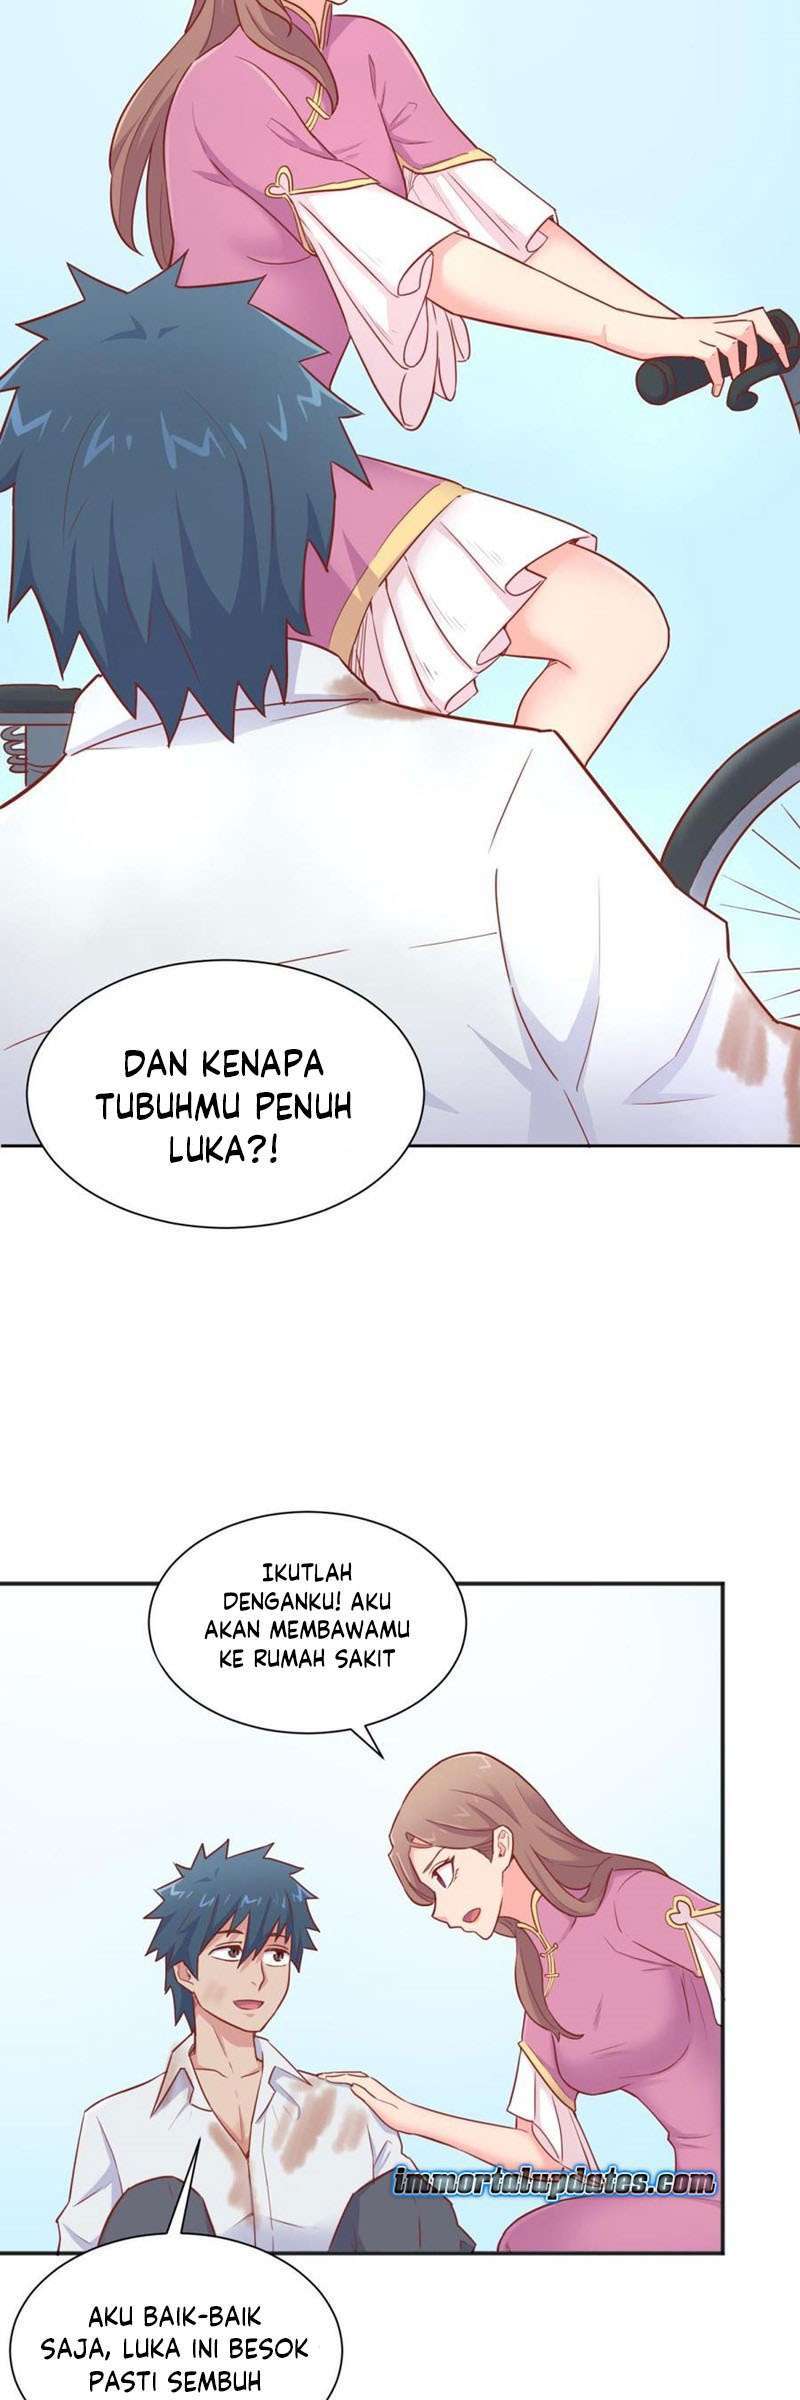 Goddess’s Personal Doctor Chapter 23